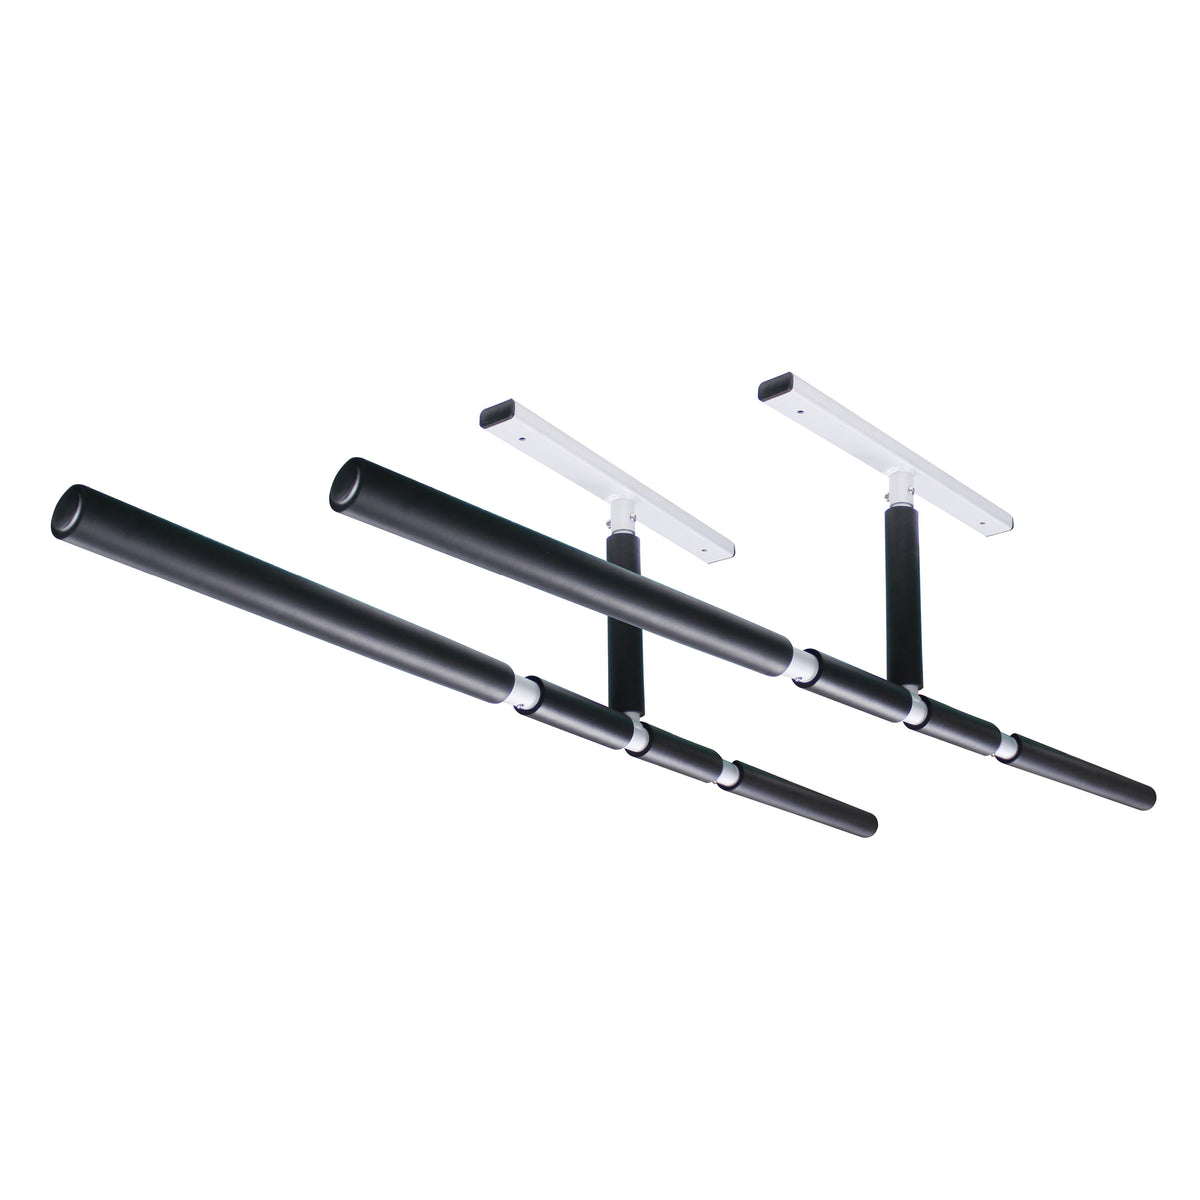 Extreme Max 3006.8417 Aluminum SUP / Surfboard Ceiling Rack for Home and Garage Overhead Storage